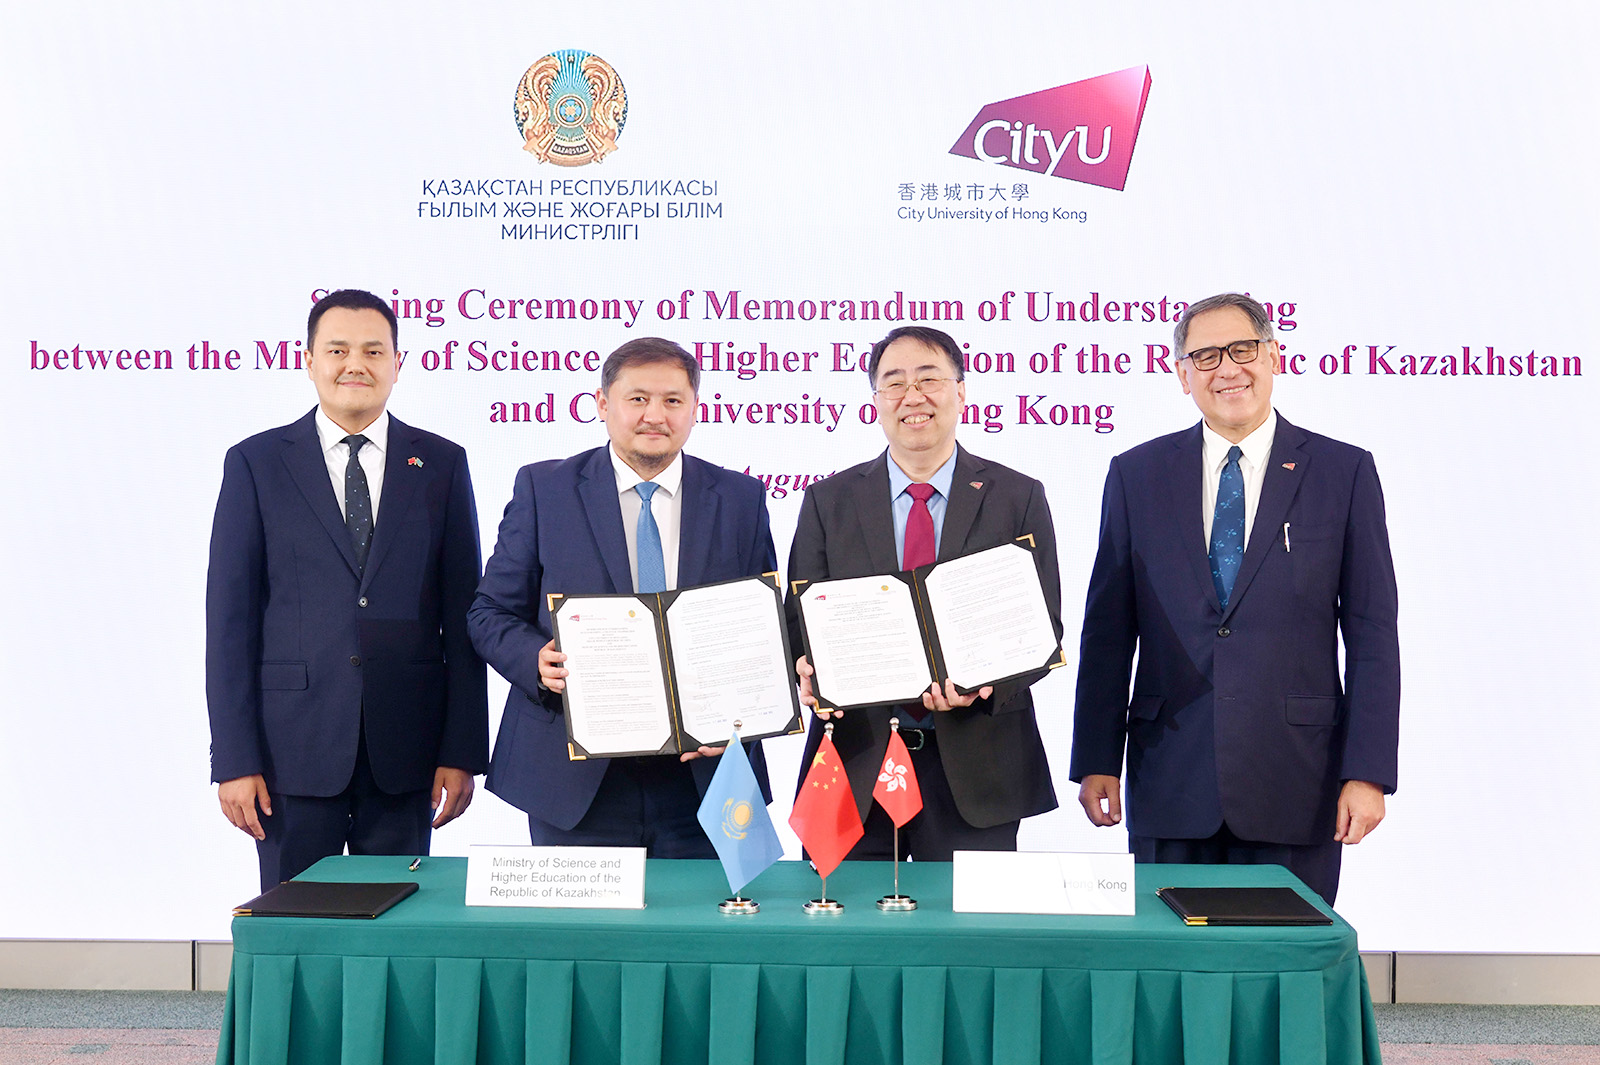 (From the right) Mr Lester Garson Huang, Council Chairman of CityU, Professor Lee Chun-sing, Provost and Deputy President of CityU, Mr Sayasat Nurbek, Minister of Science and Higher Education, and Mr Almas Seitakynov, Consul General of the Republic of Kazakhstan in Hong Kong and Macao.